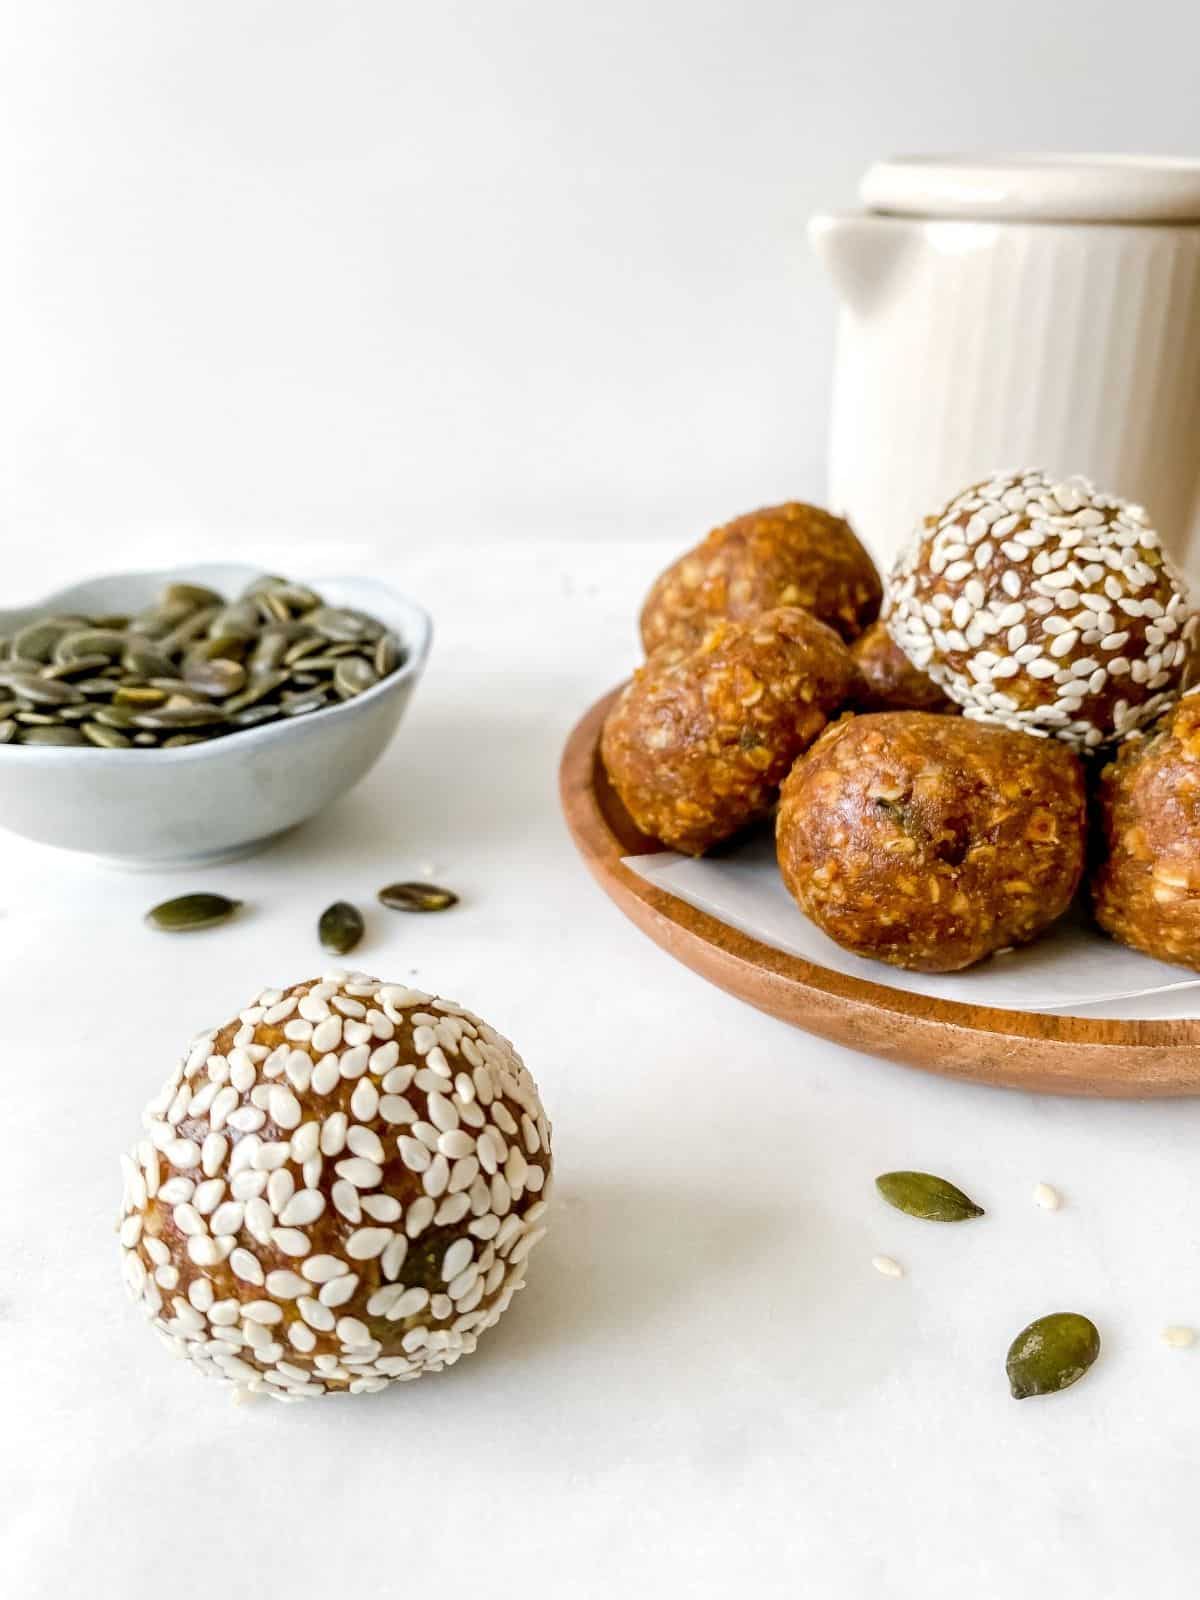 turmeric ginger energy balls on a wooden plate next to a cream jug and bowl of pumpkin seeds.